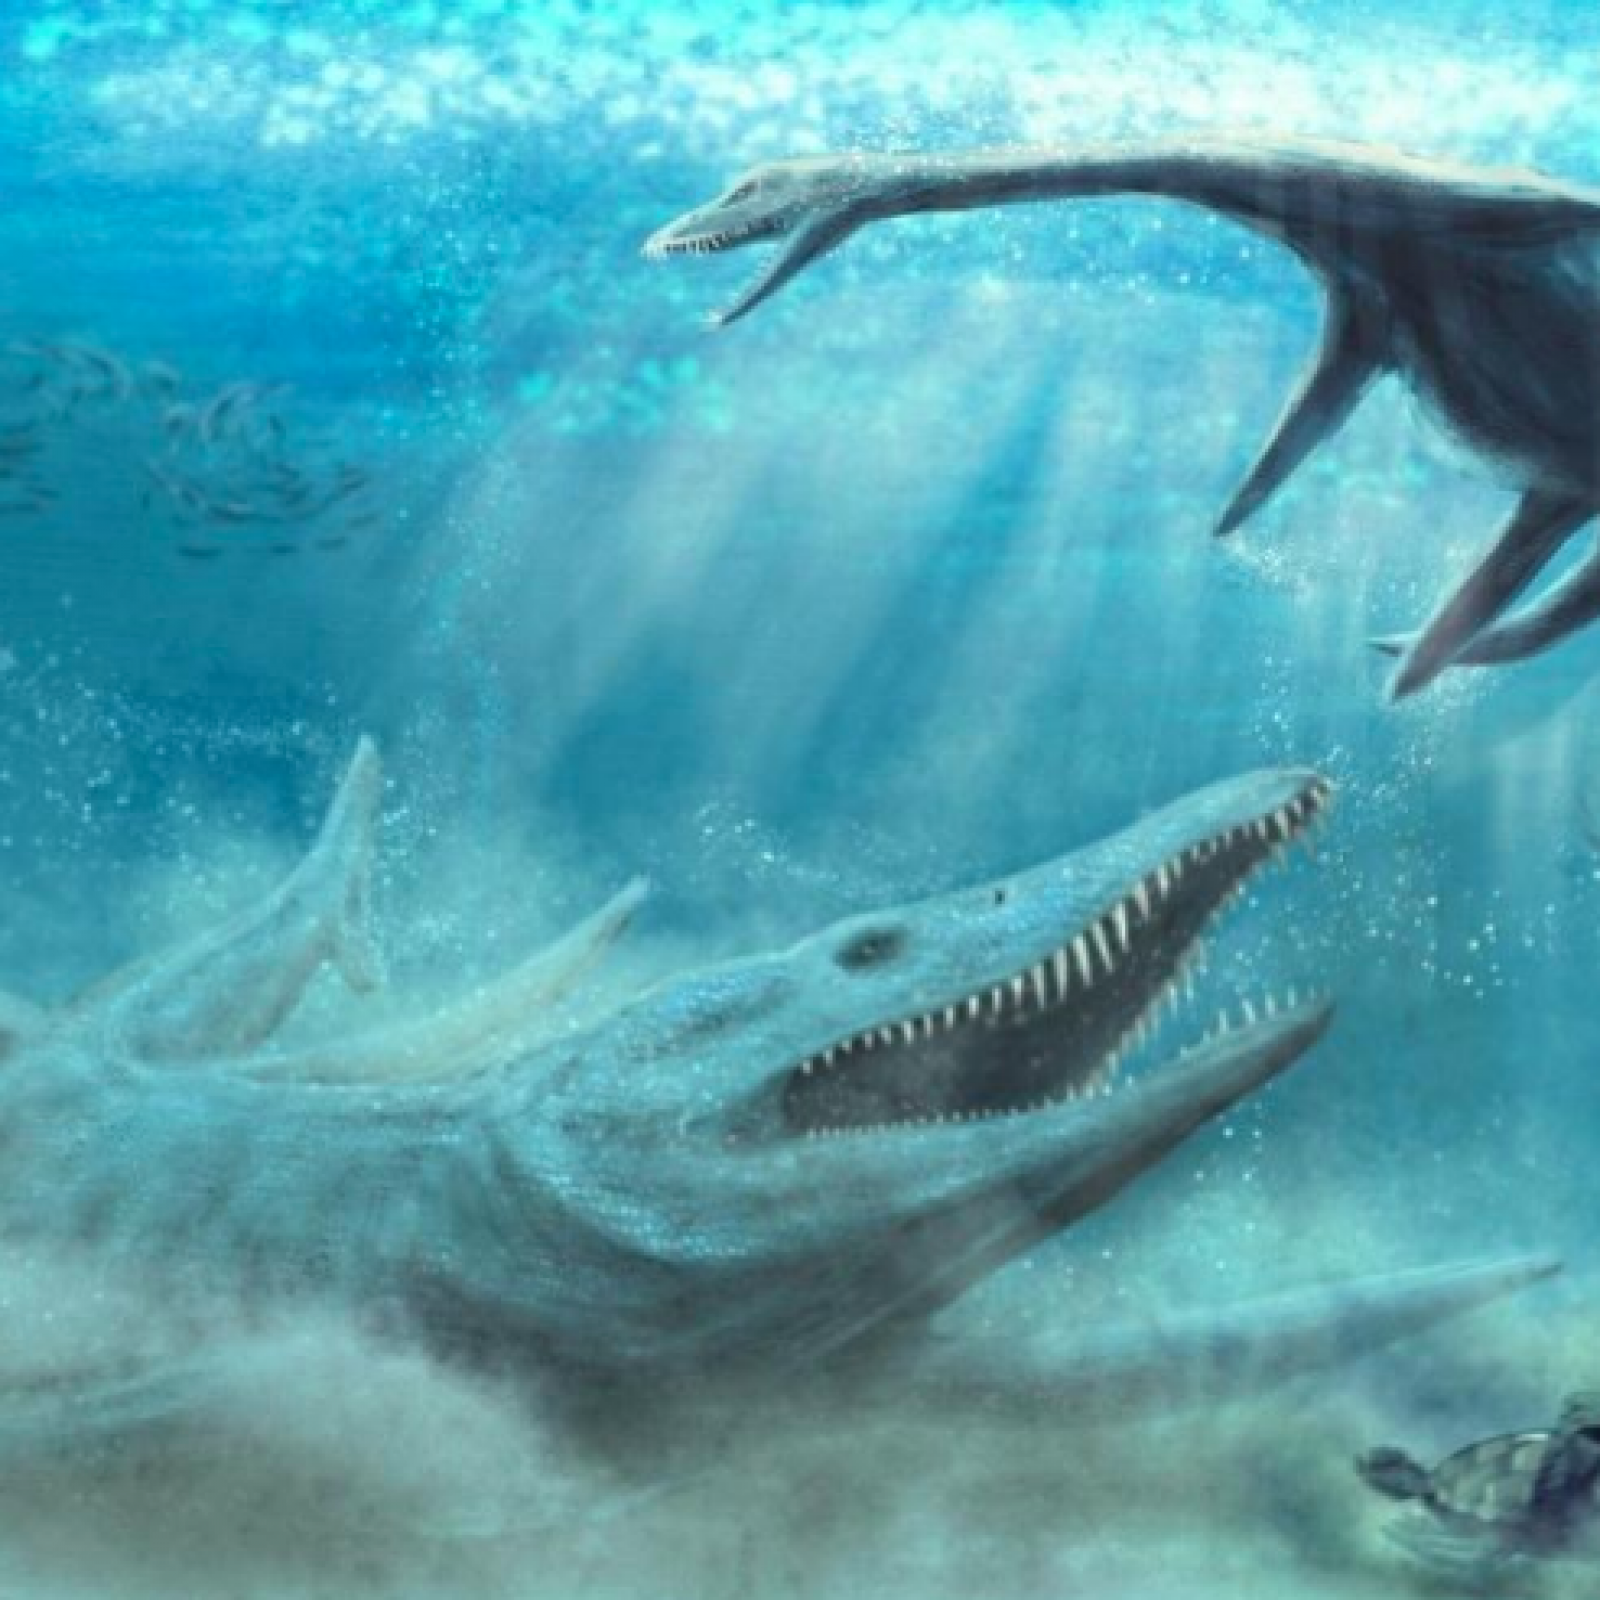 33-foot-long 'Sea Monster' That 'Hunted All Animals' Found Surrounded by  Ancient Crocodile Skulls and Teeth